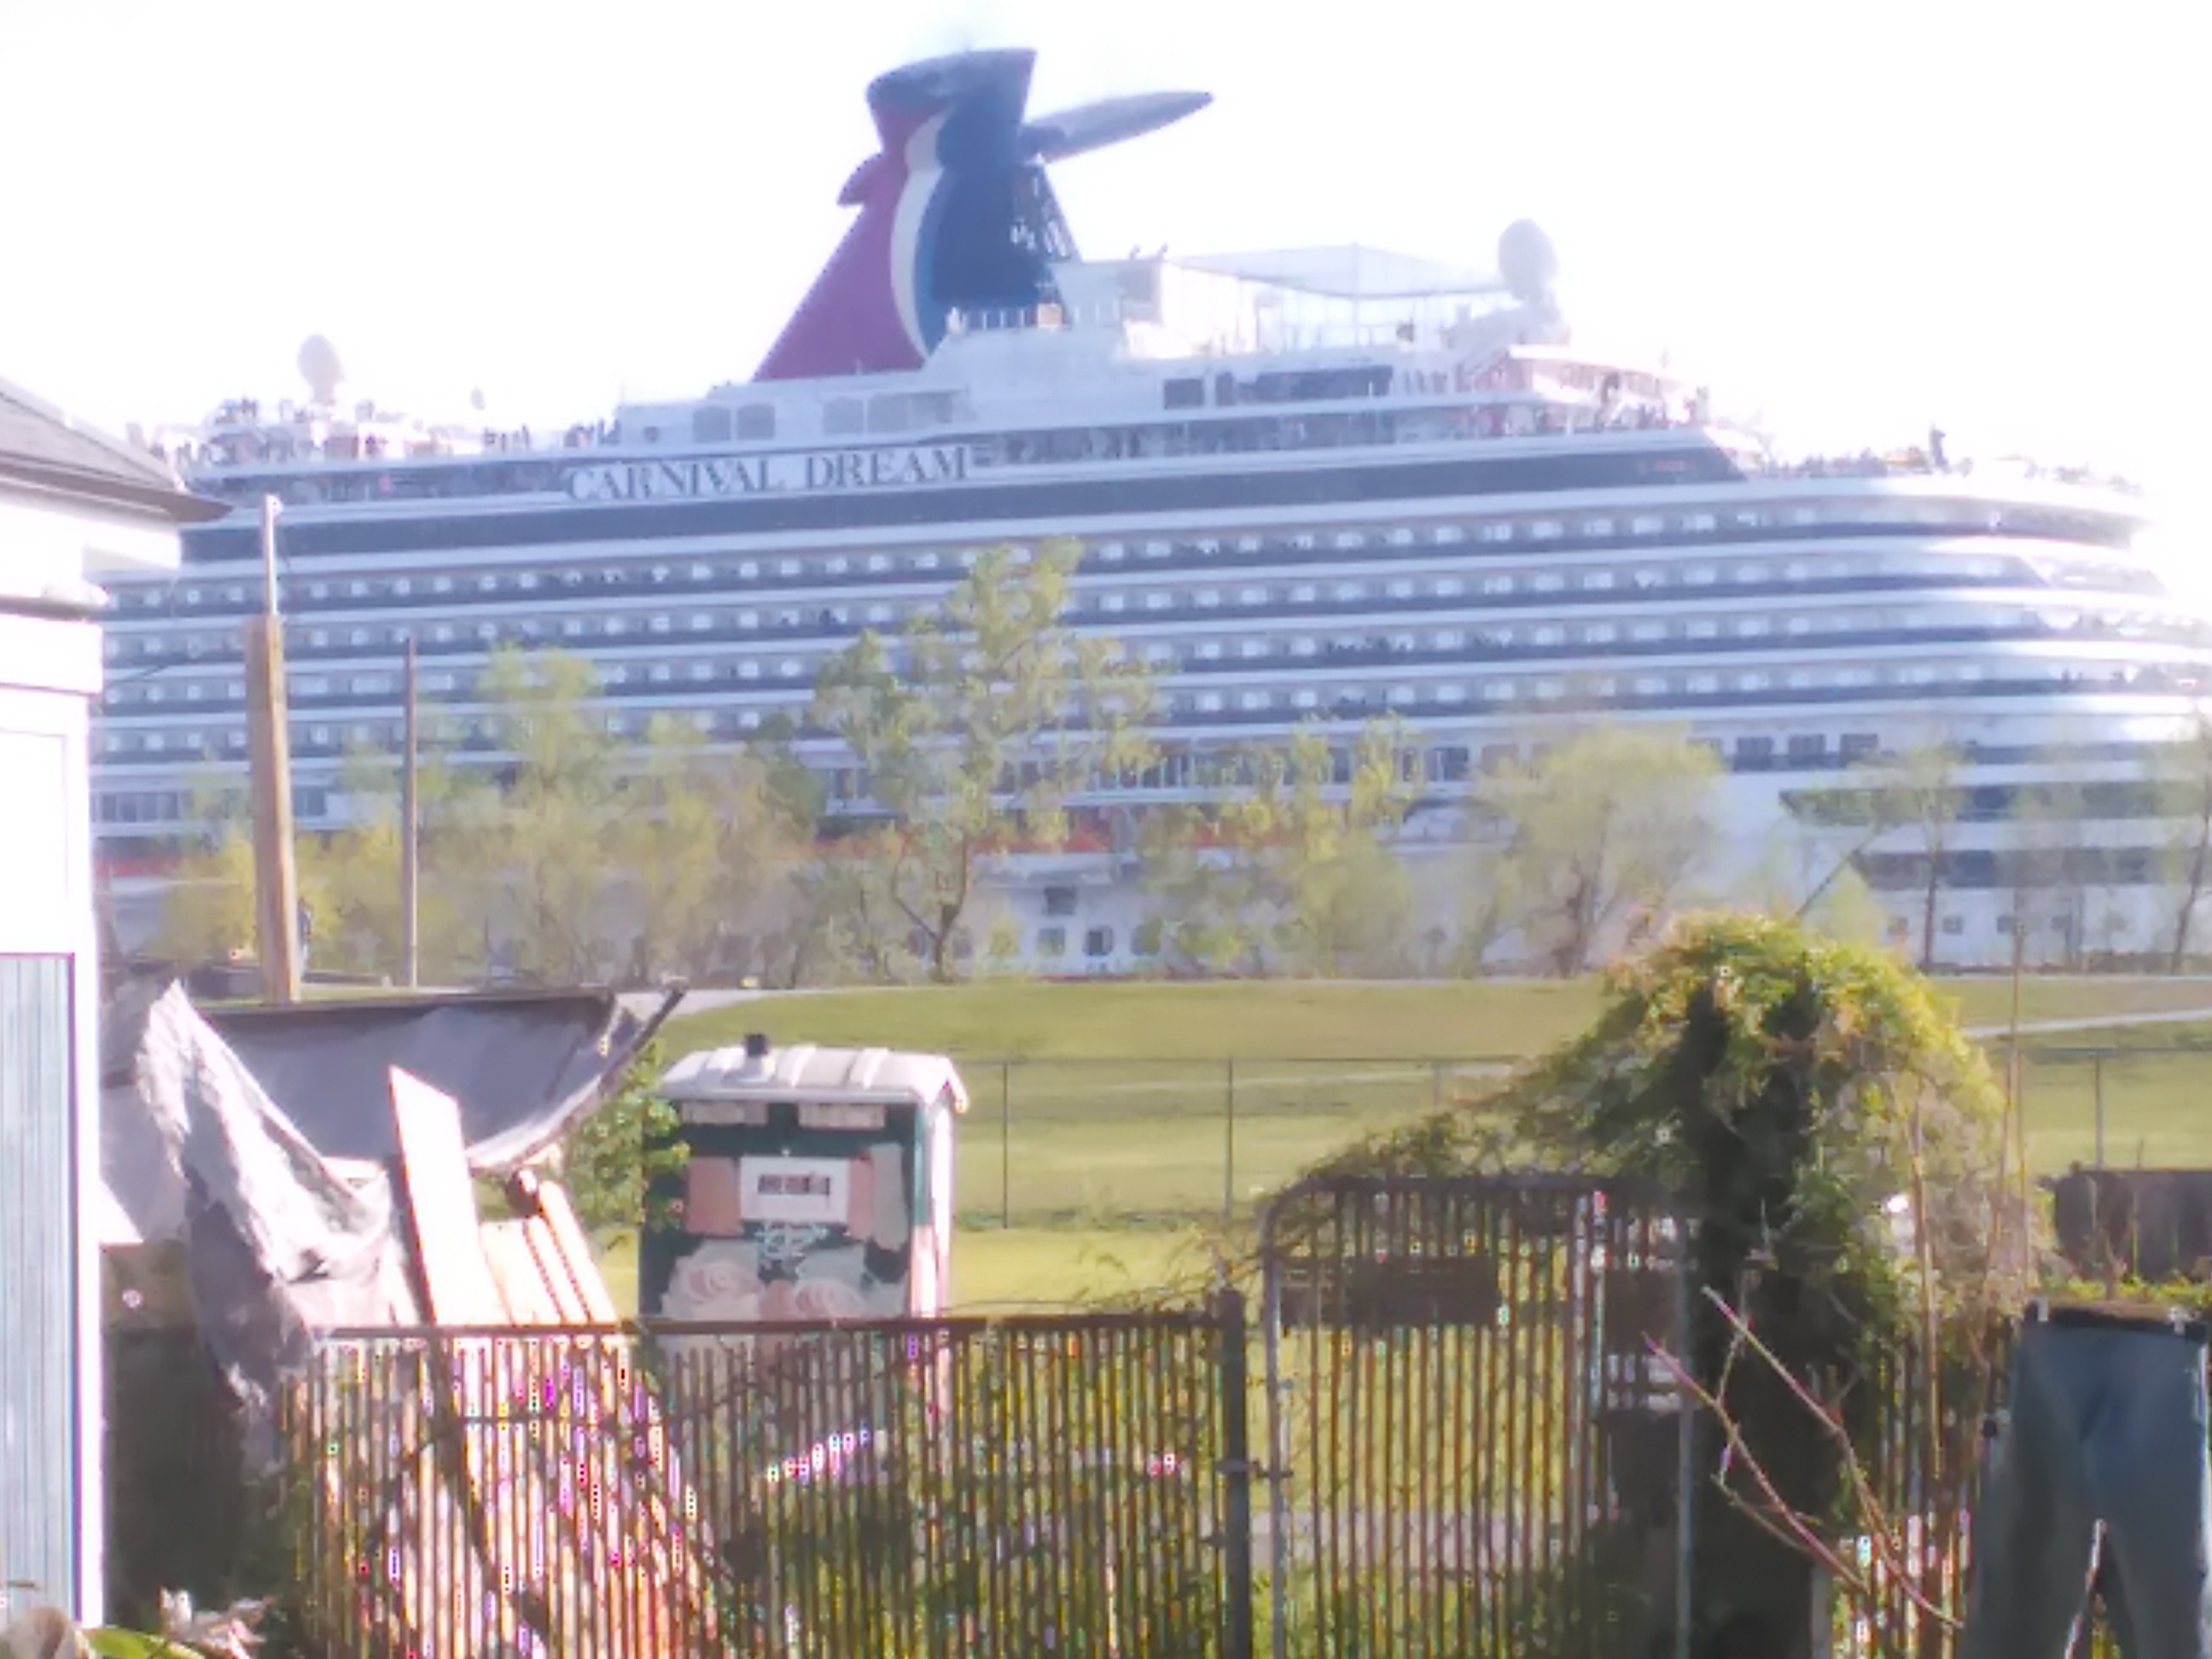 a cruise liner in my backyard